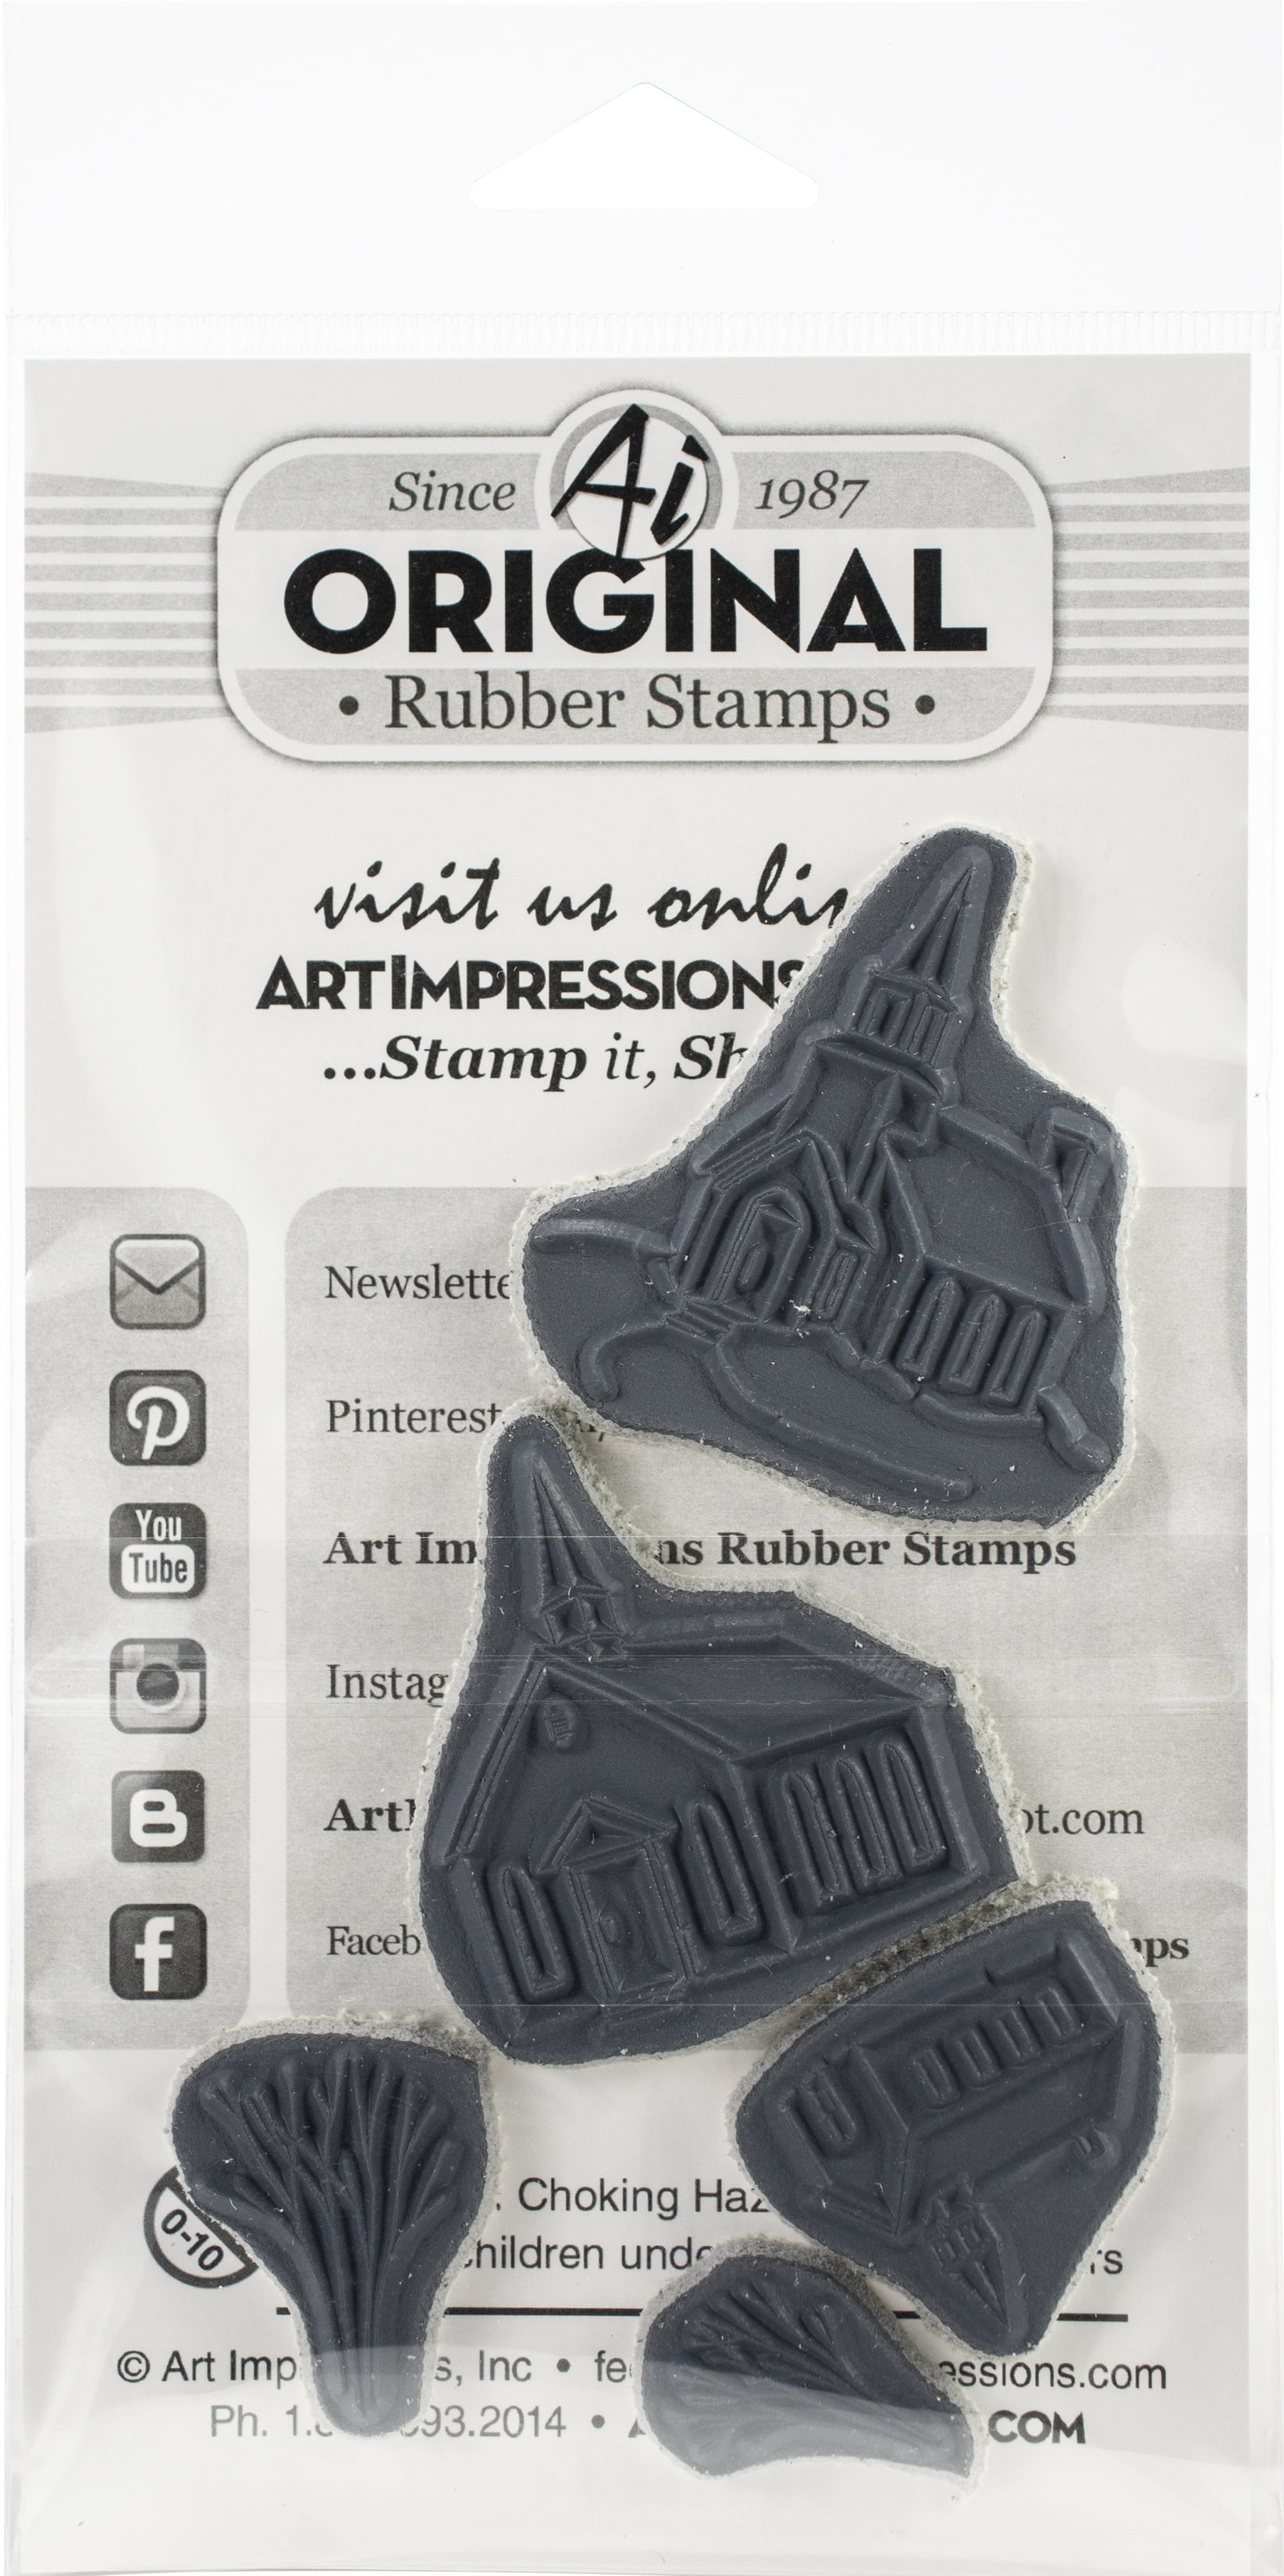 Star Shape Excellent Rubber Stamp for Scrapbooking Crafting Stamping - Mini  1/2 Inch